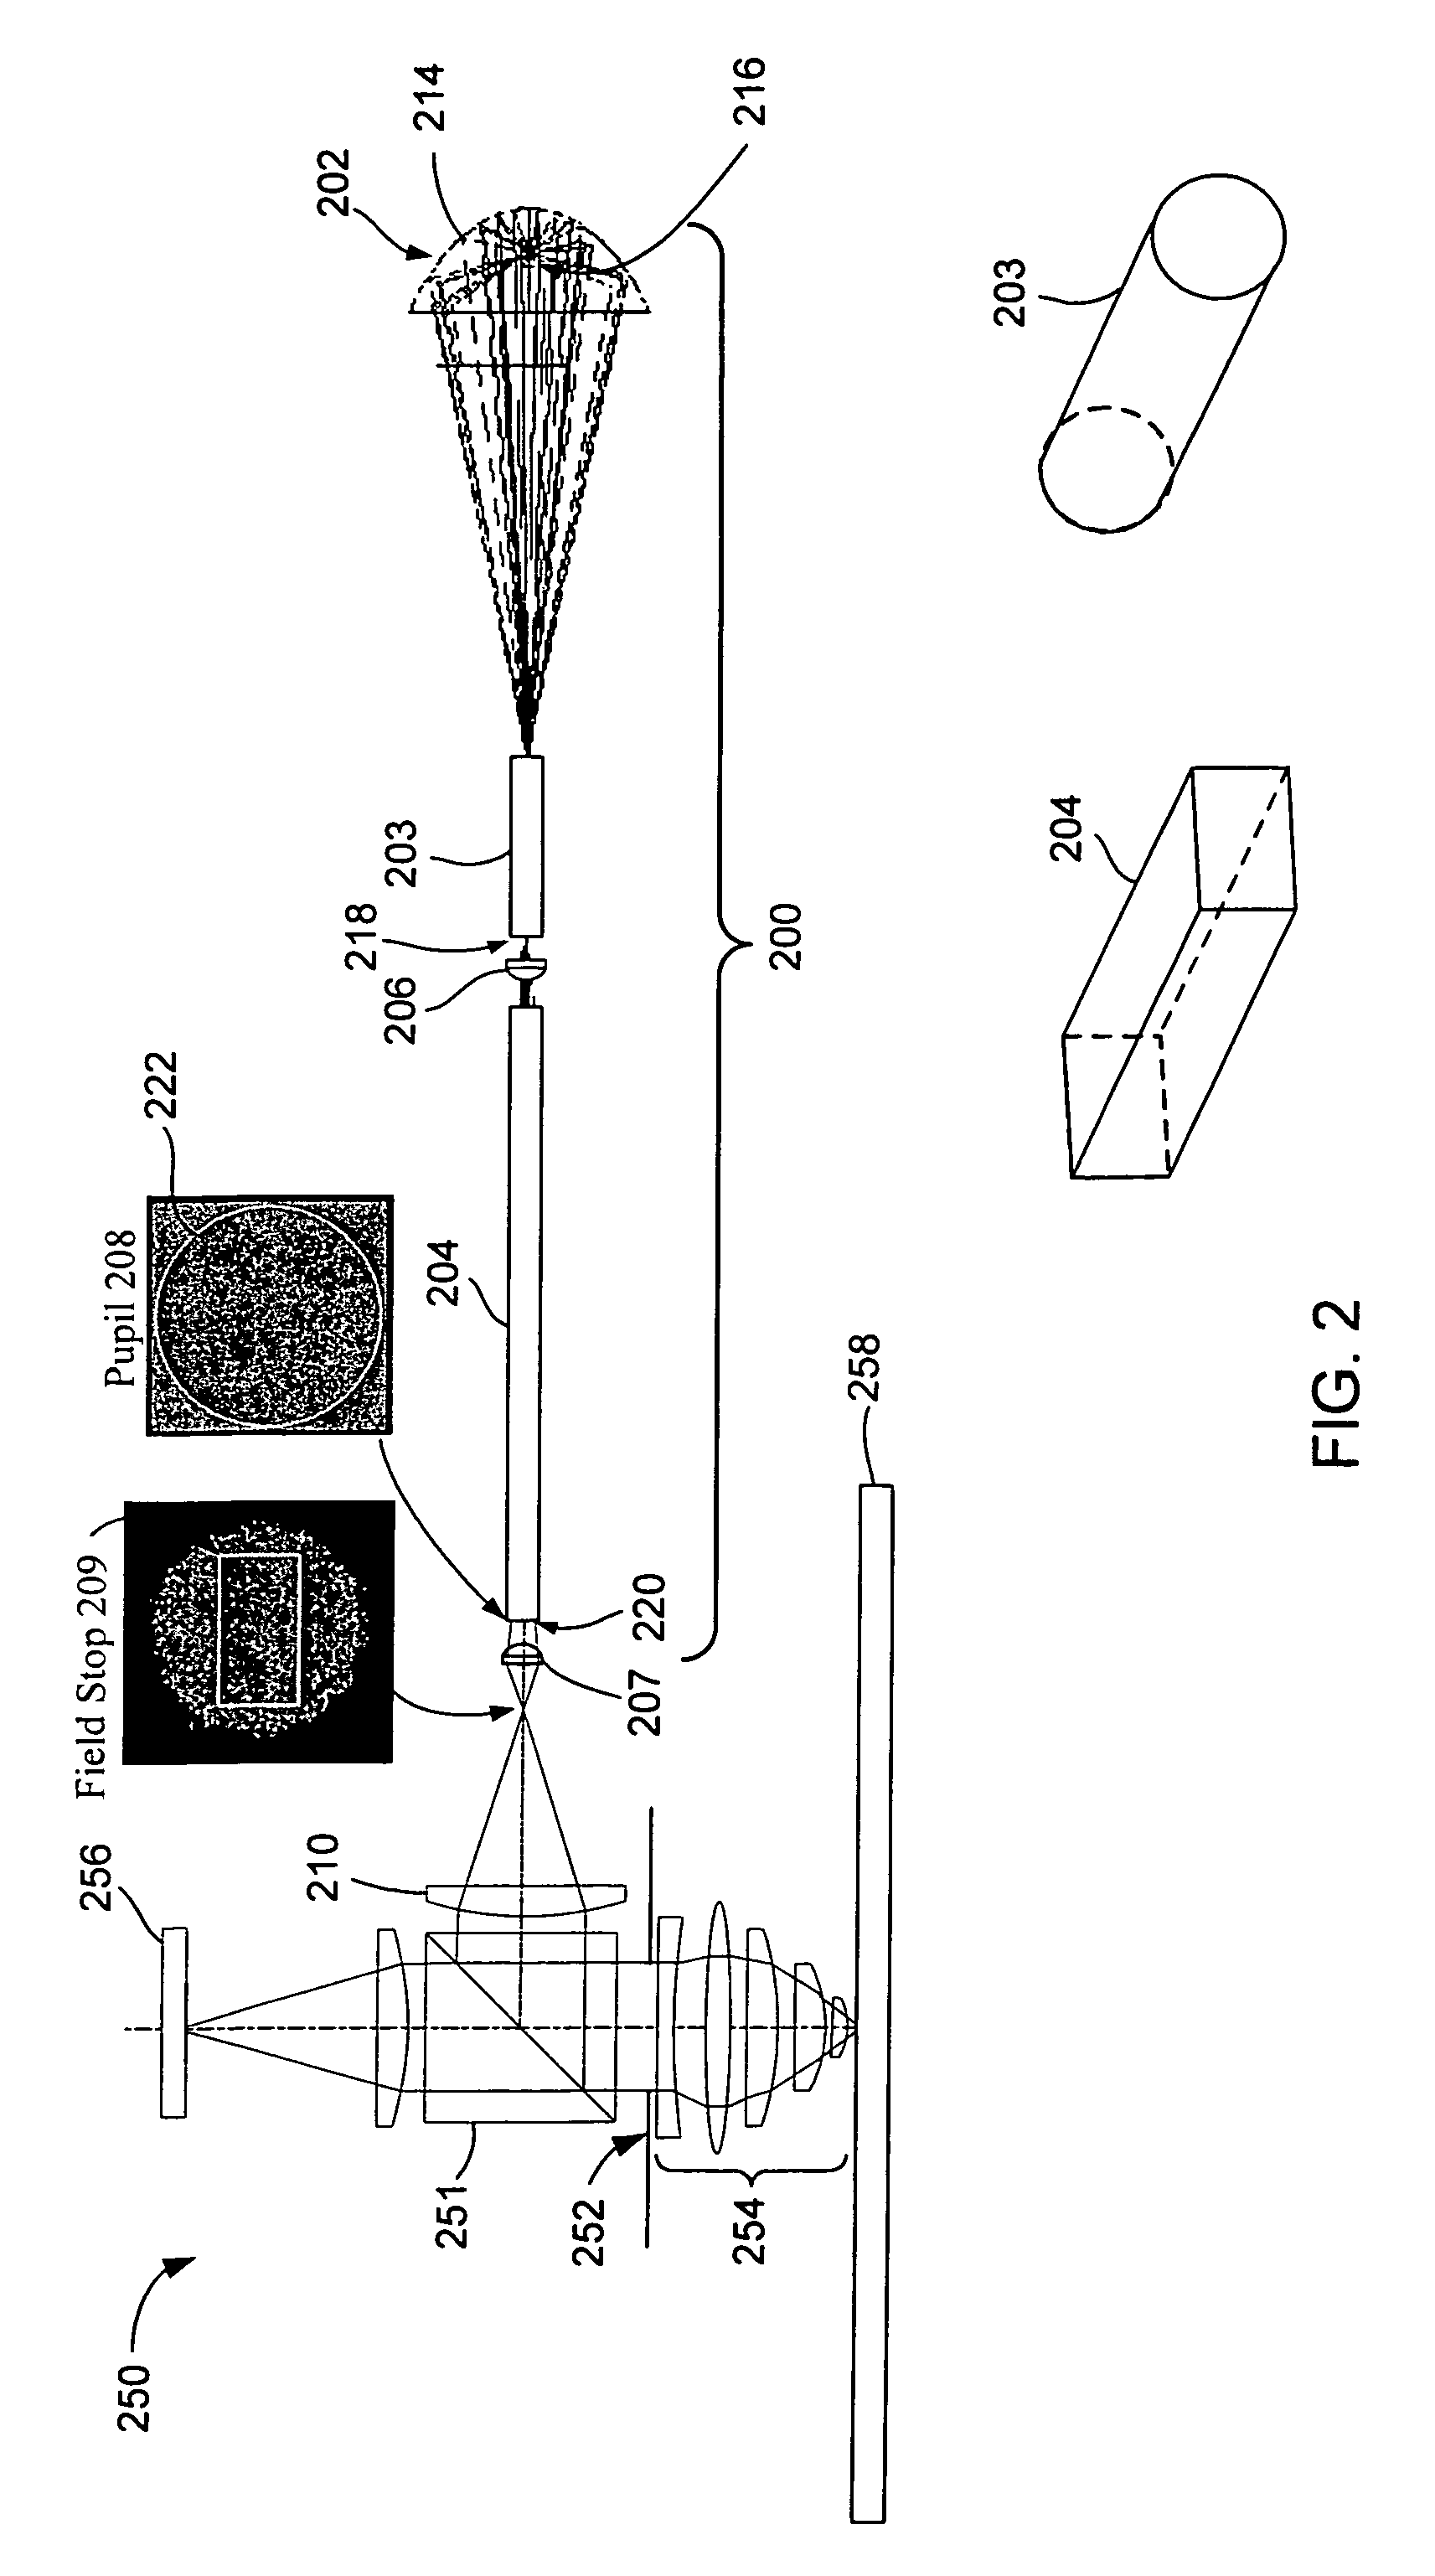 Uniform pupil illumination for optical inspection systems